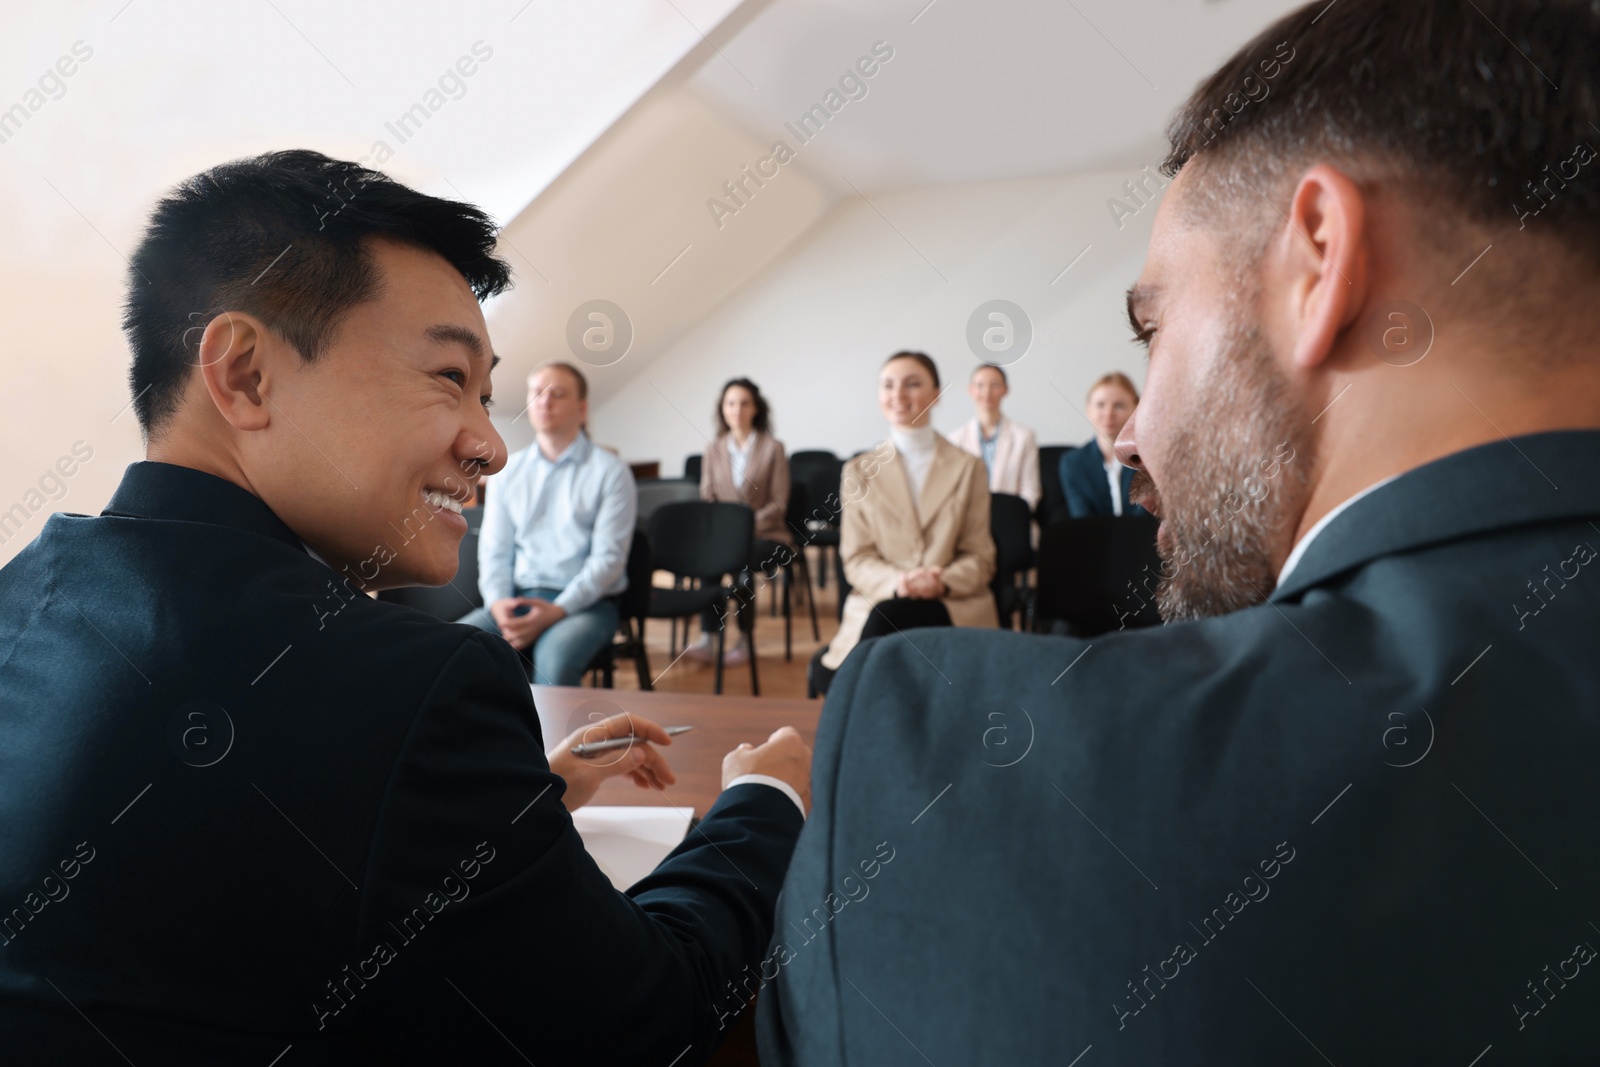 Photo of Business people having discussion in conference room